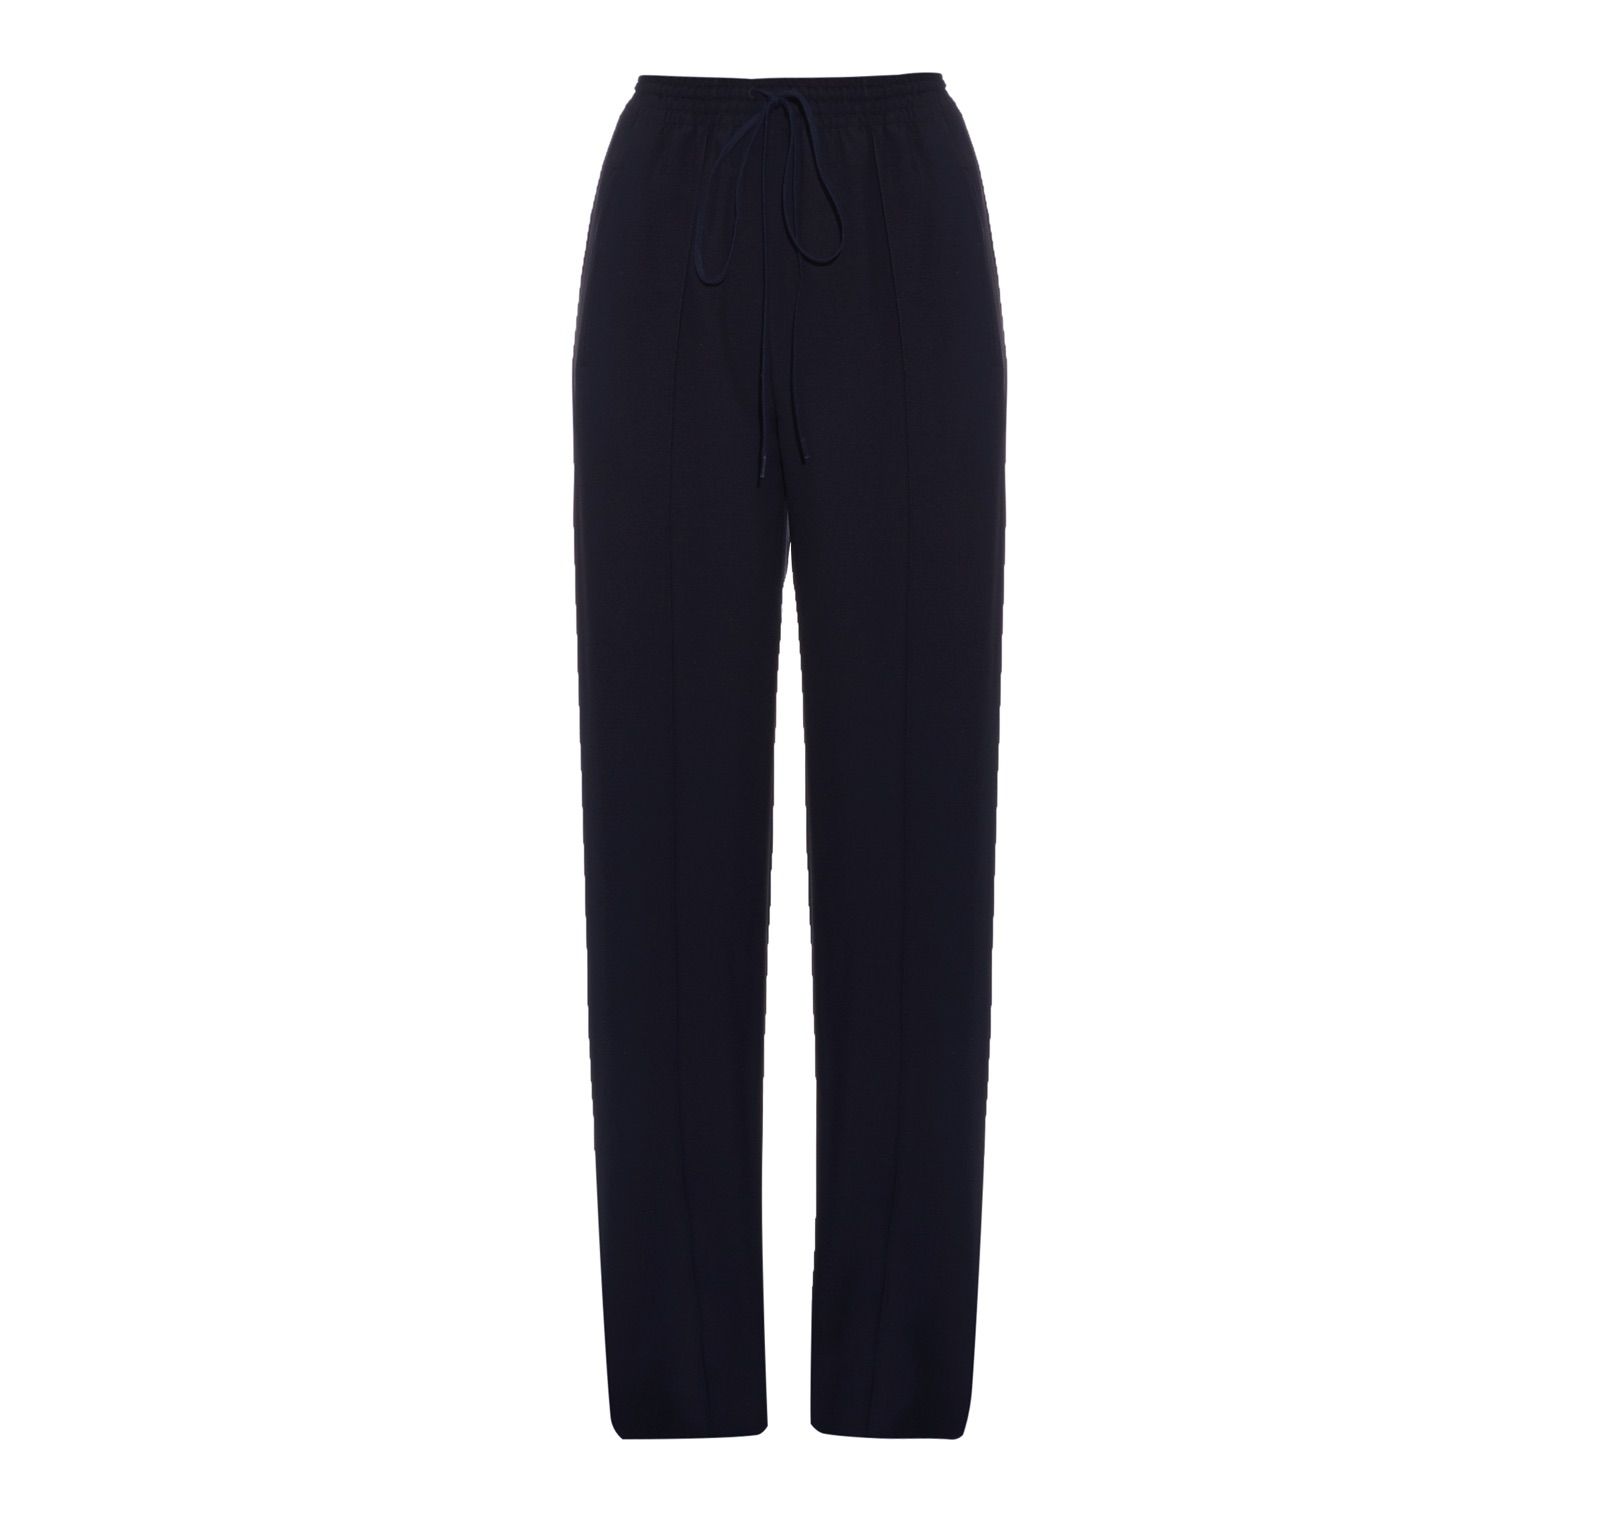 5 stylish pants to celebrate Thanksgiving in comfort | Lifestyle Asia ...